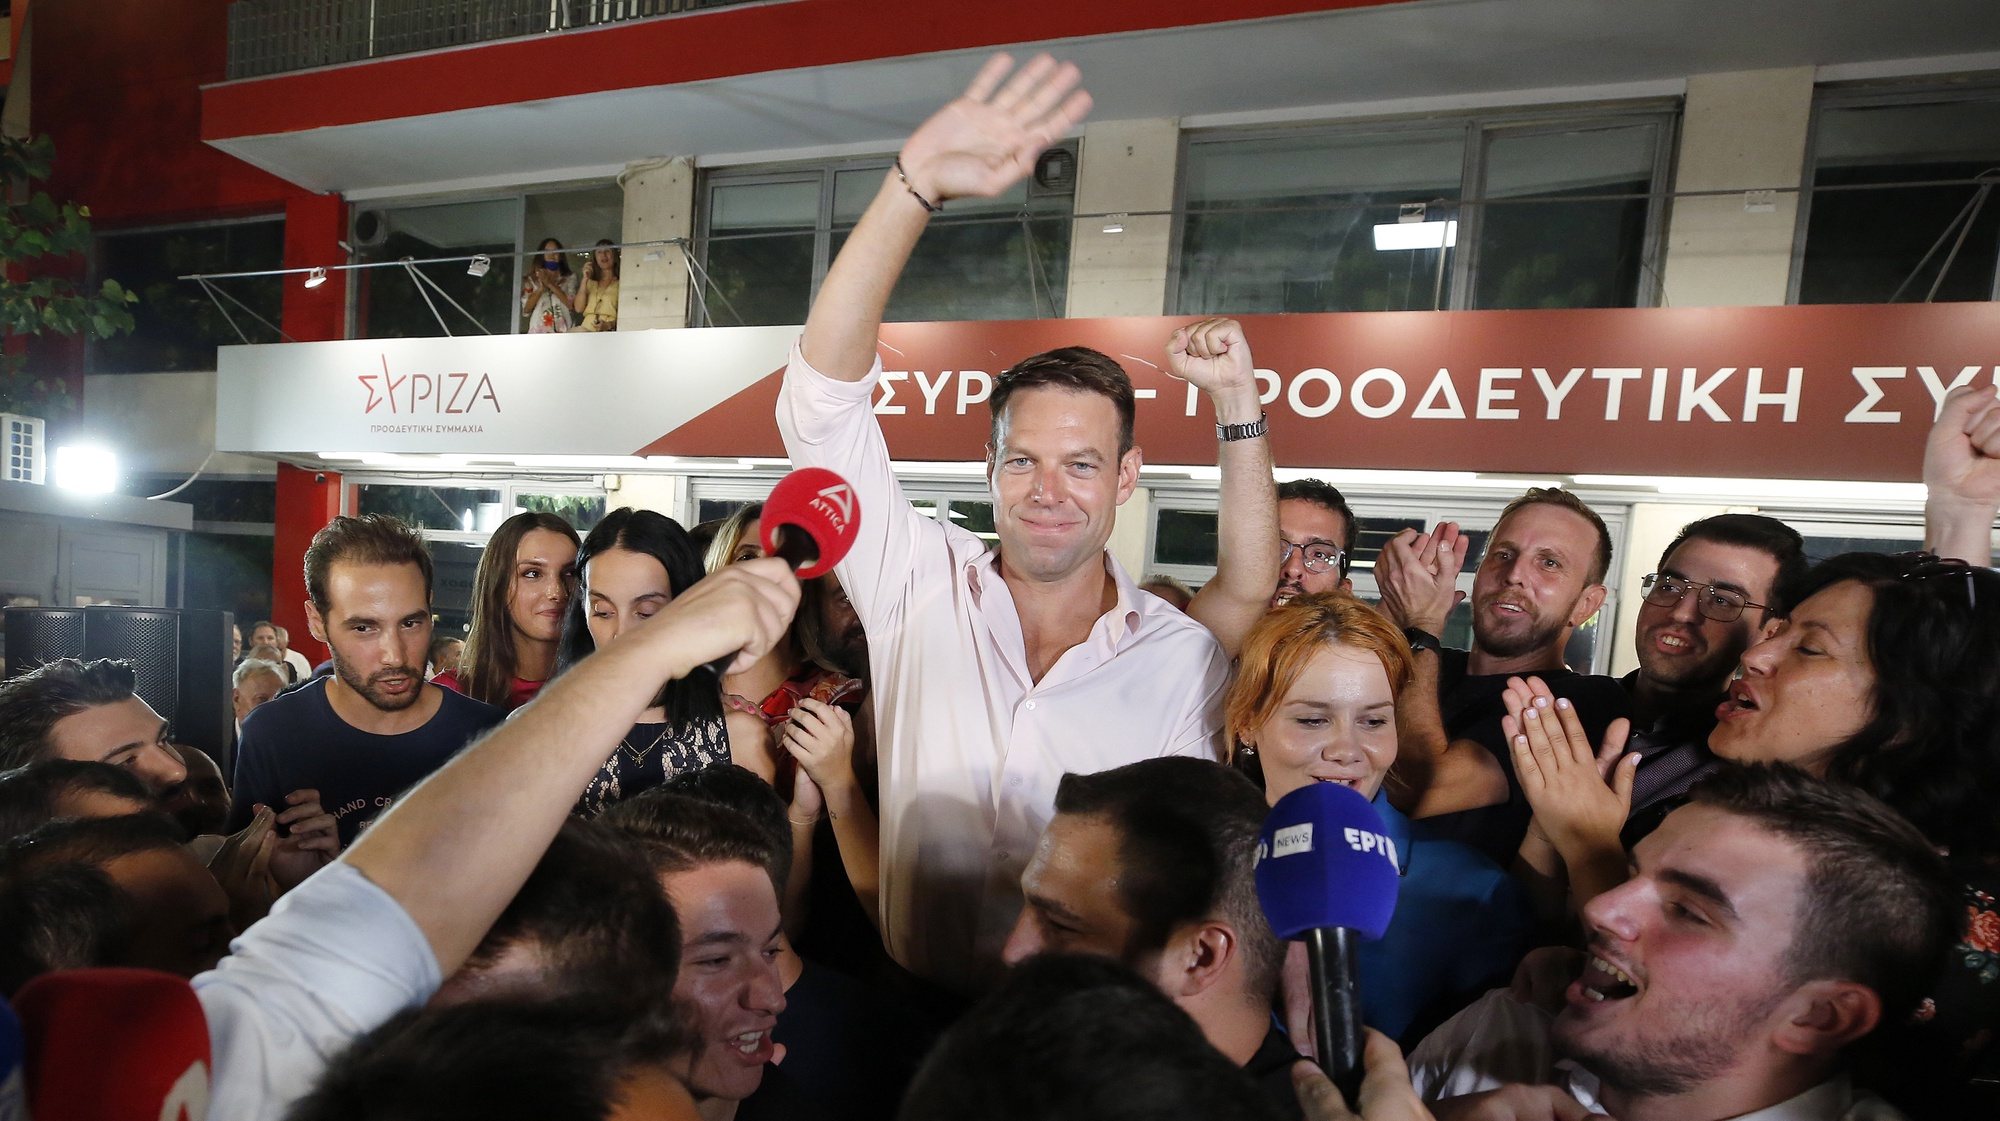 epa10881744 Stefanos Kasselakis (C), elected as the new President of the SYRIZA-Progressive Alliance party, greets supporters as he arrives at the party&#039; s offices in Athens, Greece, 24 September 2023. With 75 percent of the votes counted, Kasselakis on 24 September emerged as the victor of the election for a new leader of main opposition SYRIZA-Progressive Alliance, according to an announcement by Yiannis Drosos, head of the party&#039;s Electoral Committee. Kasselakis received 56.69 percent of the vote, against 43.31 percent for rival candidate Effie Achtsioglou.  EPA/ALEXANDROS VLACHOS